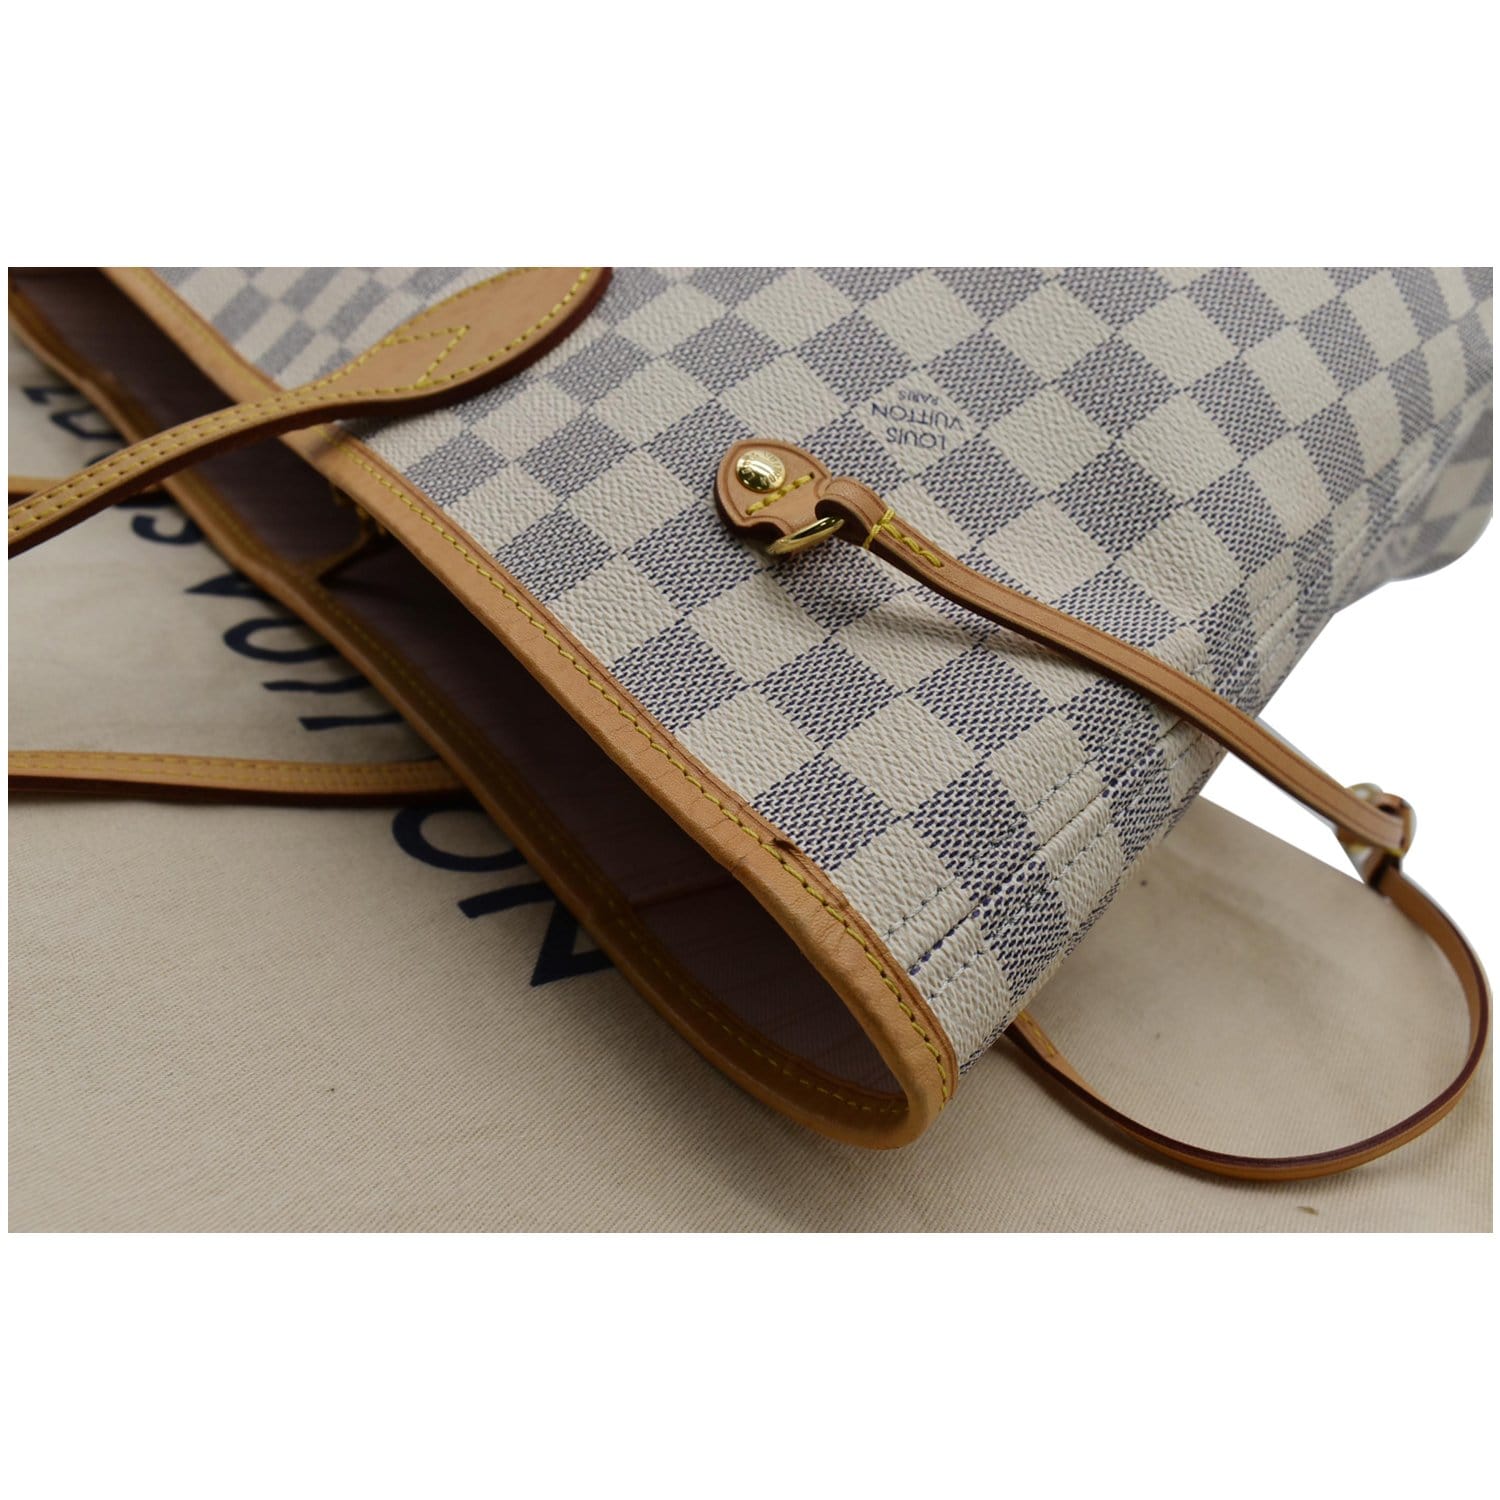 Louis Vuitton Neverfull Mm Damier Azul White Canvas Tote - MyDesignerly